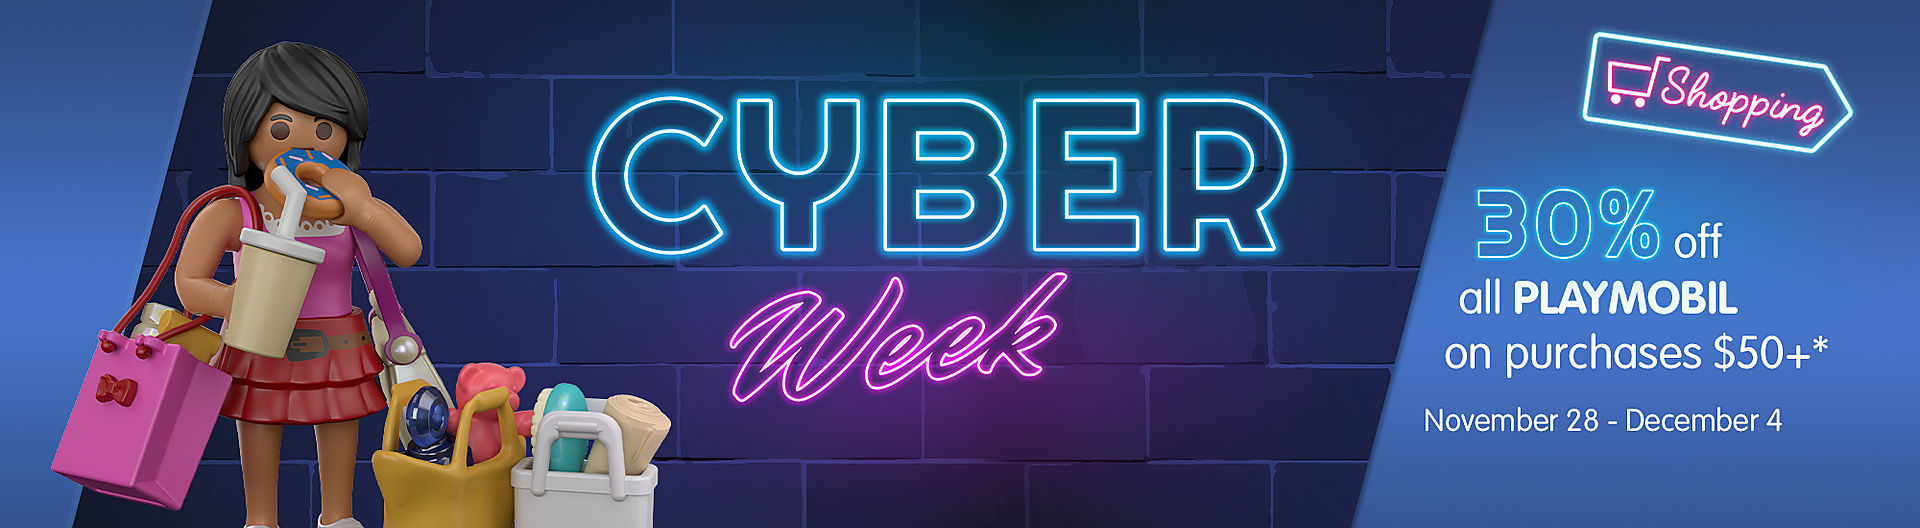 CYBER WEEK SALE - Spend $50+ and get 30% off all PLAYMOBIL